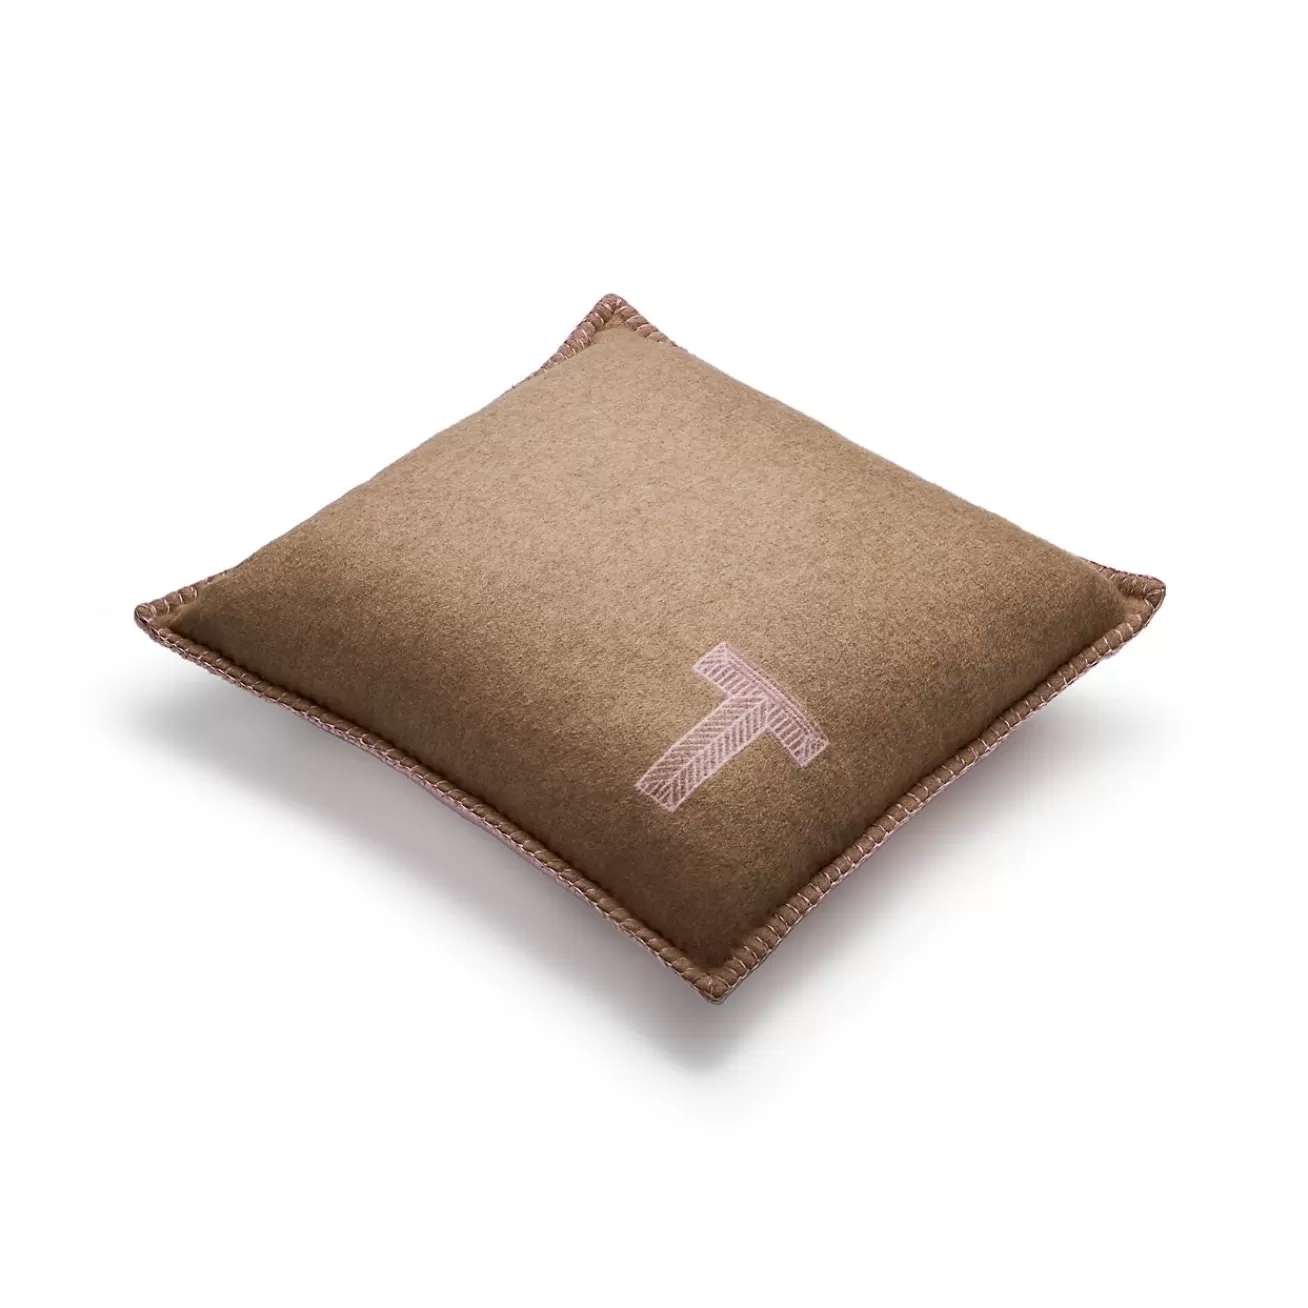 Tiffany & Co. Color Block Cushion in Beige and Morganite Pink Cashmere and Wool | ^ The Home | Housewarming Gifts